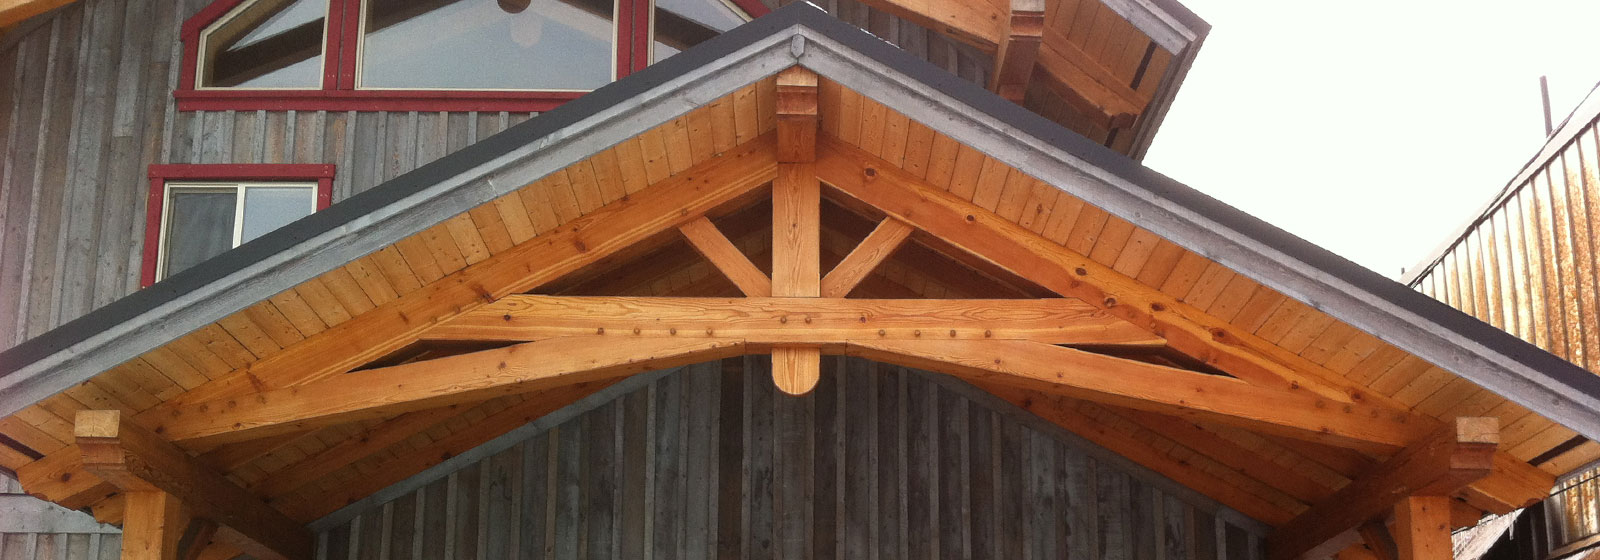 Custom designed timber frame entry with truss and exterior timber accents and elements by Log and Timber Works British Columbia